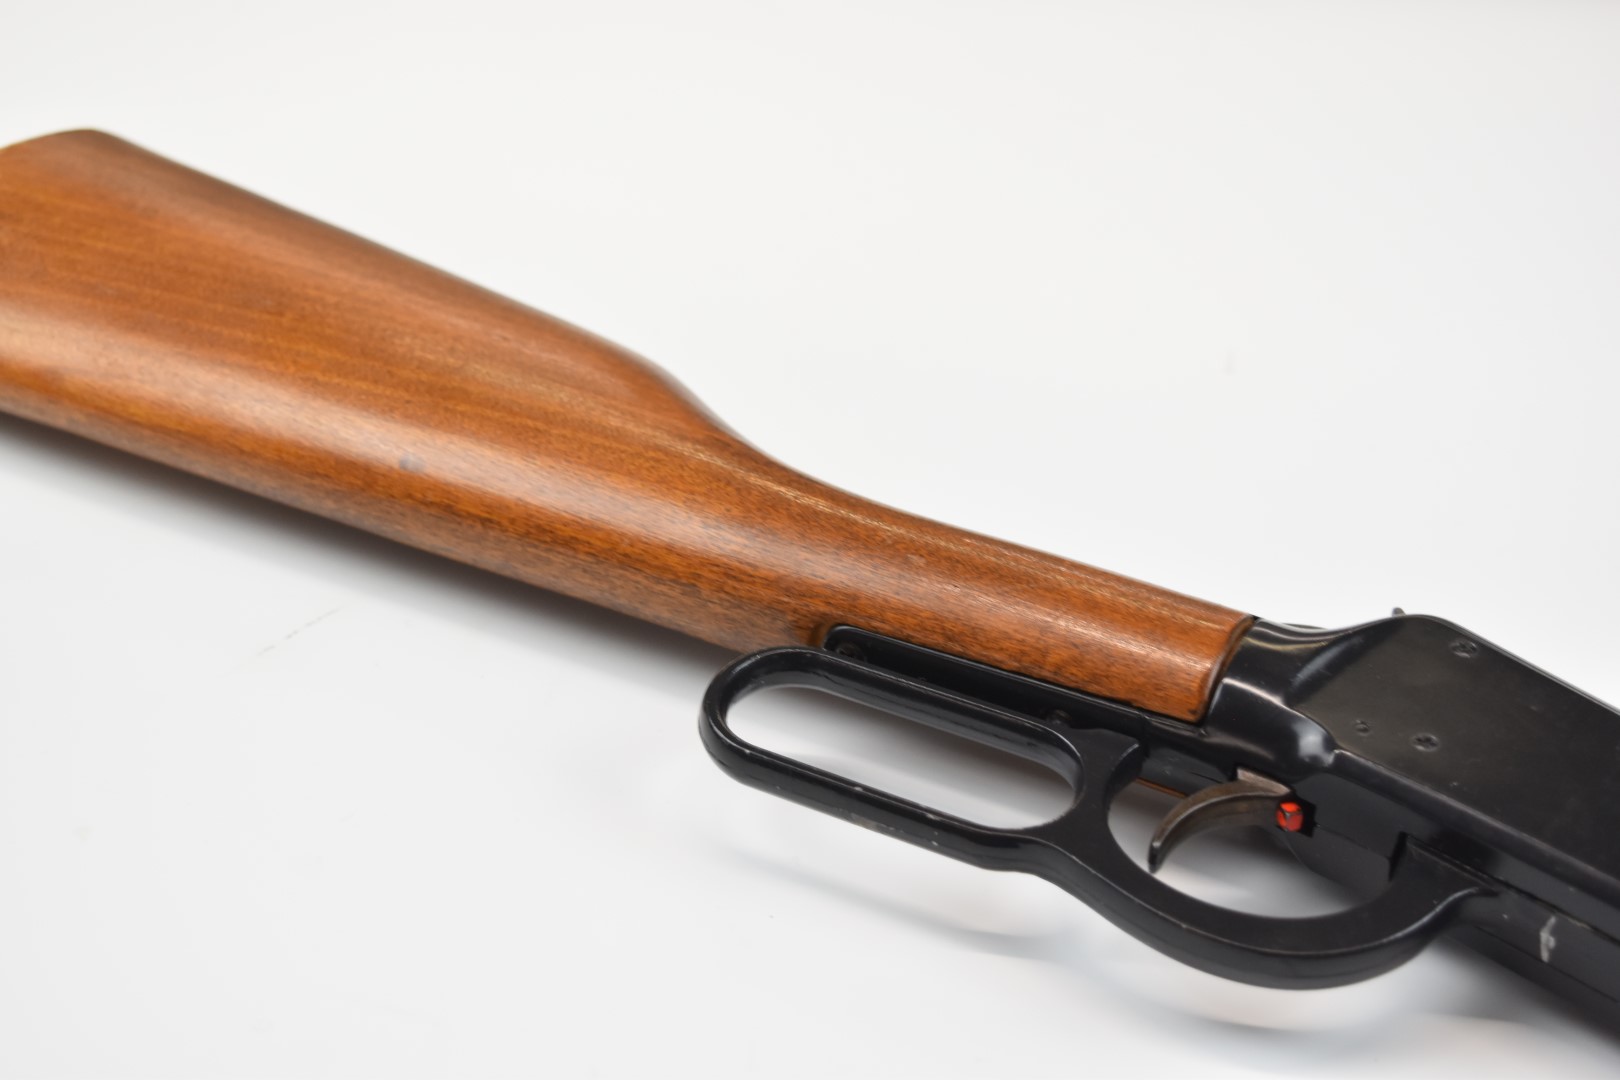 Daisy Model 1894 40 Shot Repeater .177 Winchester style under-lever air rifle with adjustable sights - Image 16 of 16